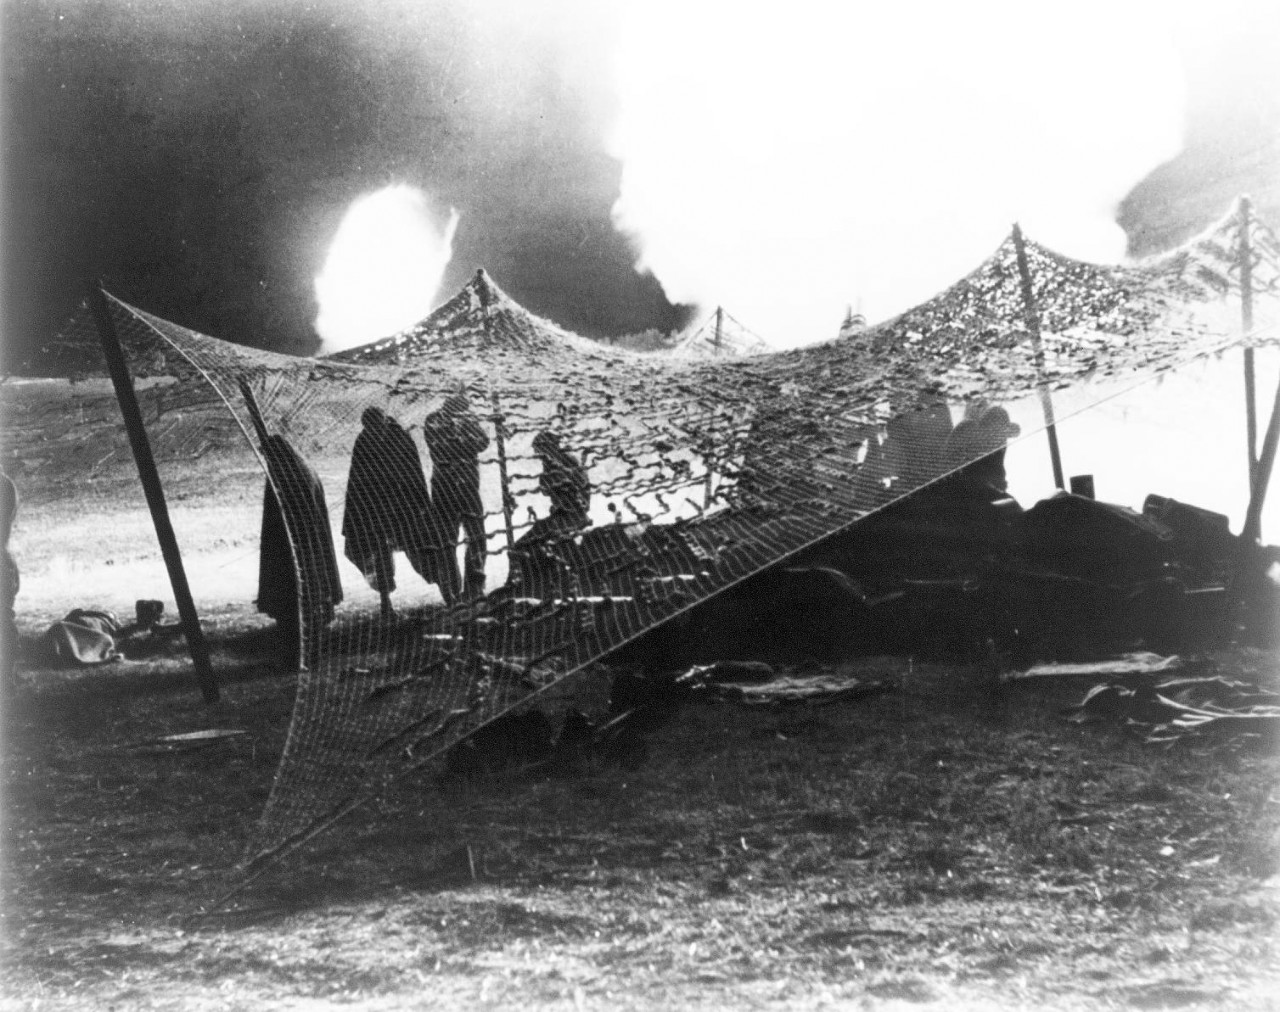 LC-USZ62-80639:   Operation Husky – Invasion of Sicily, 9 July – August 17, 1943.   “The War Does Not Stop For Darkness.”    Outside Cerami, Sicily, American 155 m.m. Howitzers throw shells at retreating Italian and German Soldiers.  Note soldiers under netting.  U.S. Army Photograph (2015/11/13).